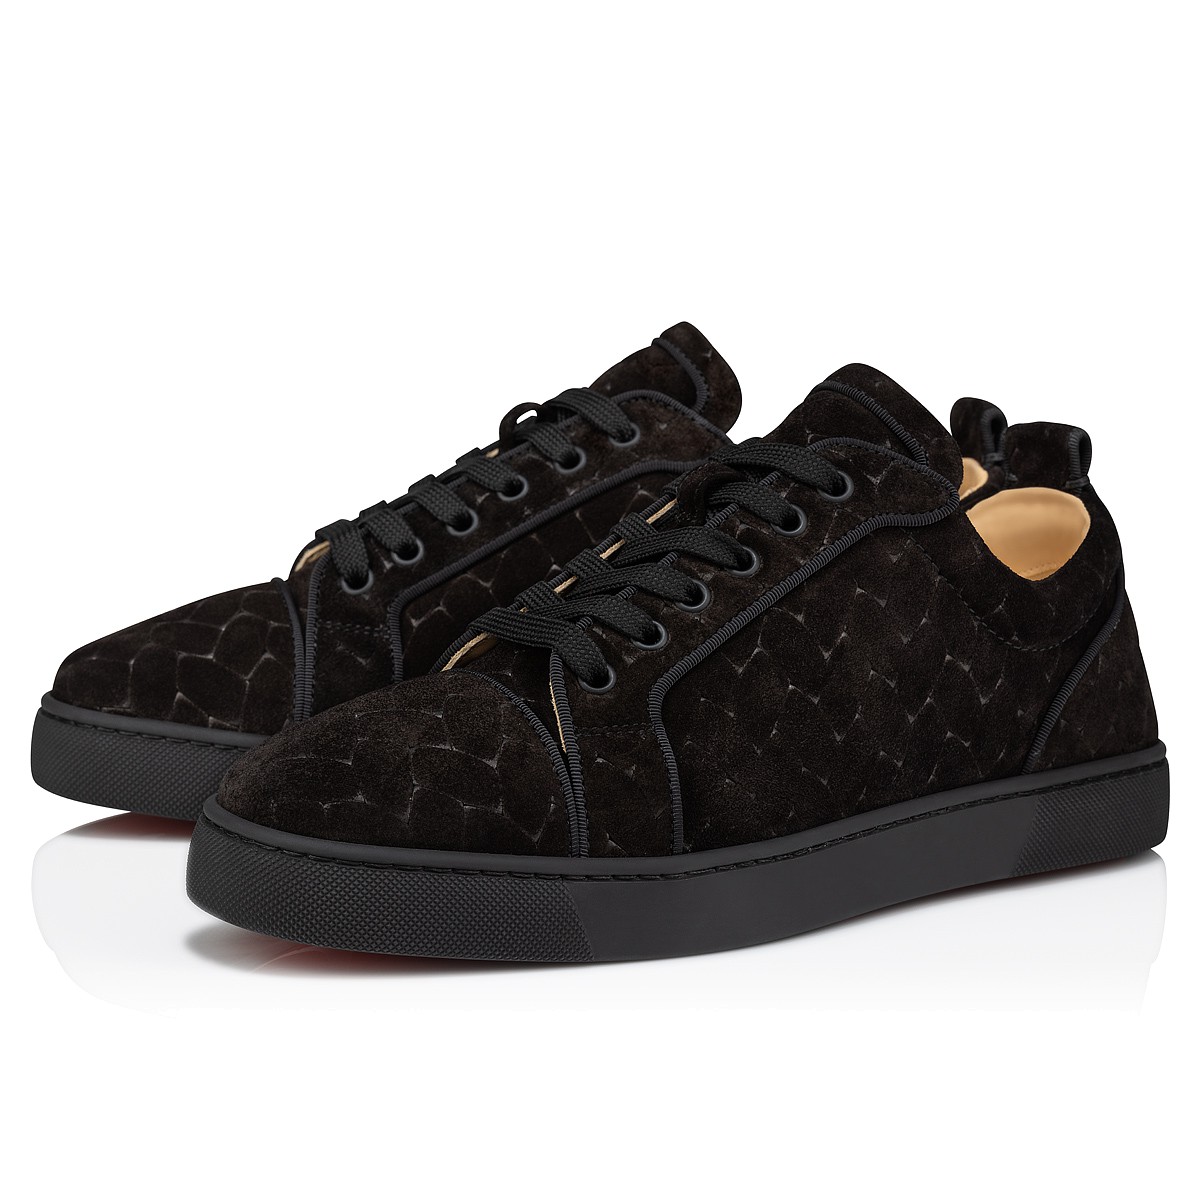 Brown Louis Junior suede trainers, Christian Louboutin